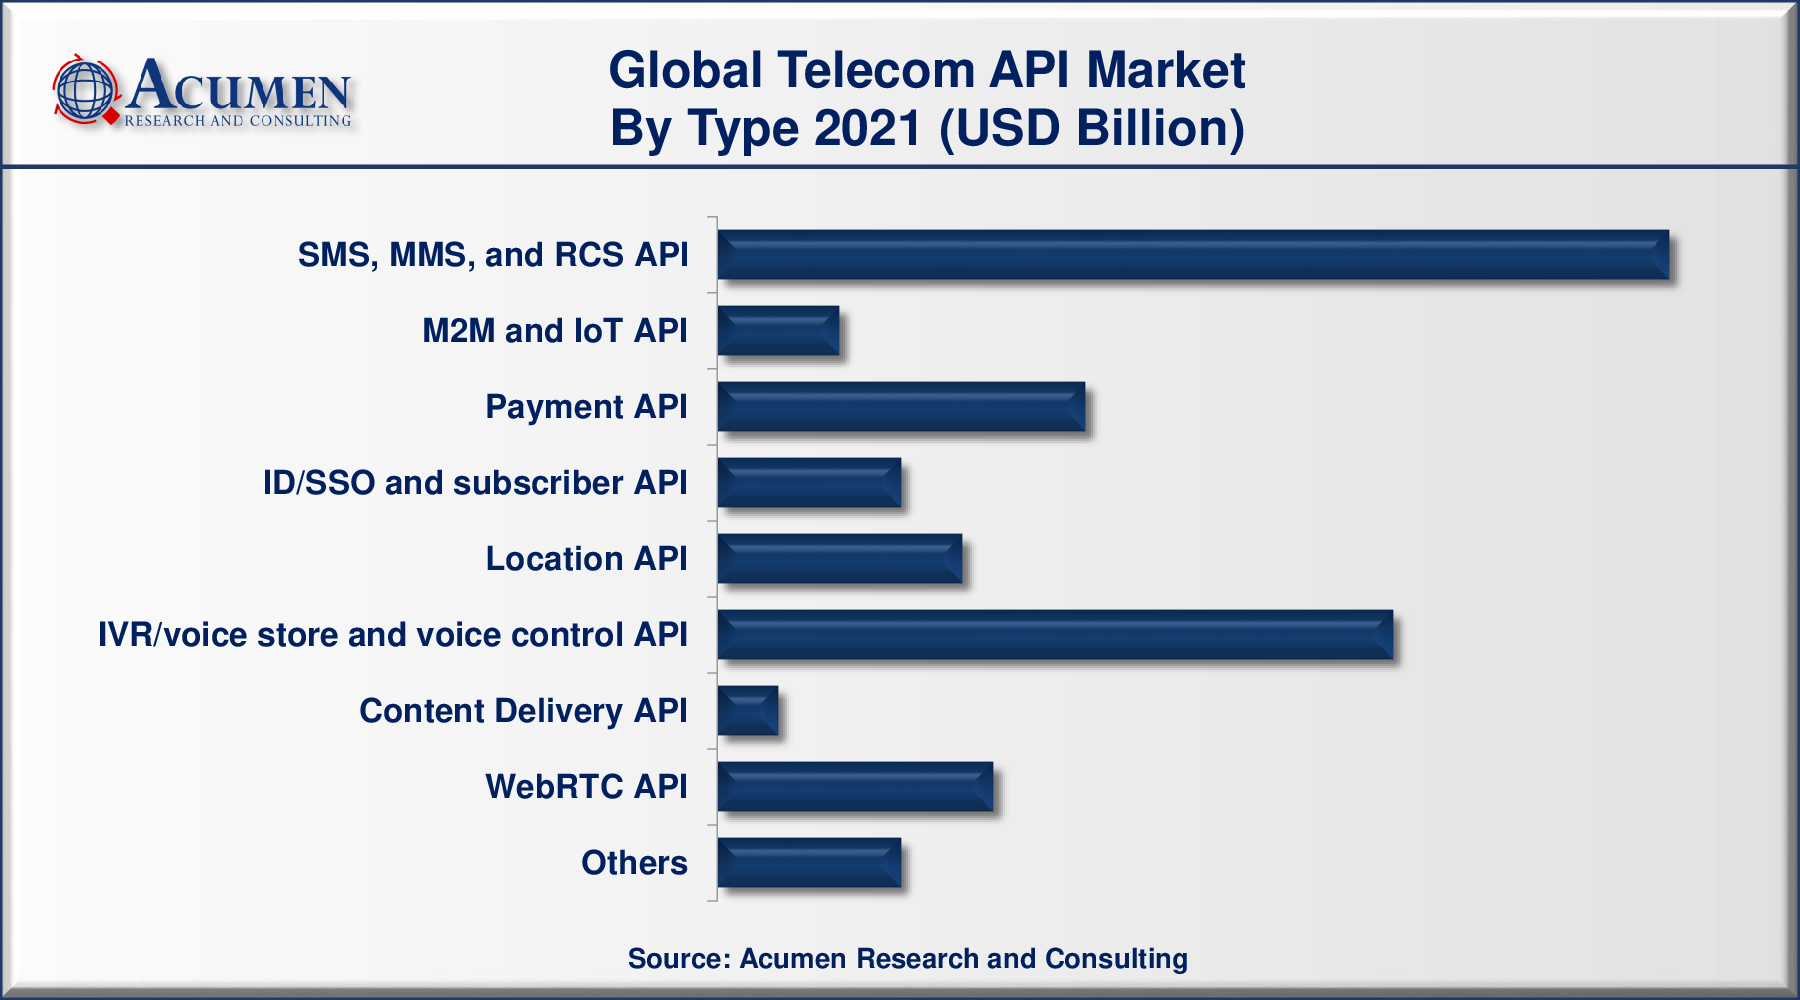 Telecom API Market Size was valued at USD 221 Billion in 2021 and is predicted to be worth USD 1,113 Billion by 2030